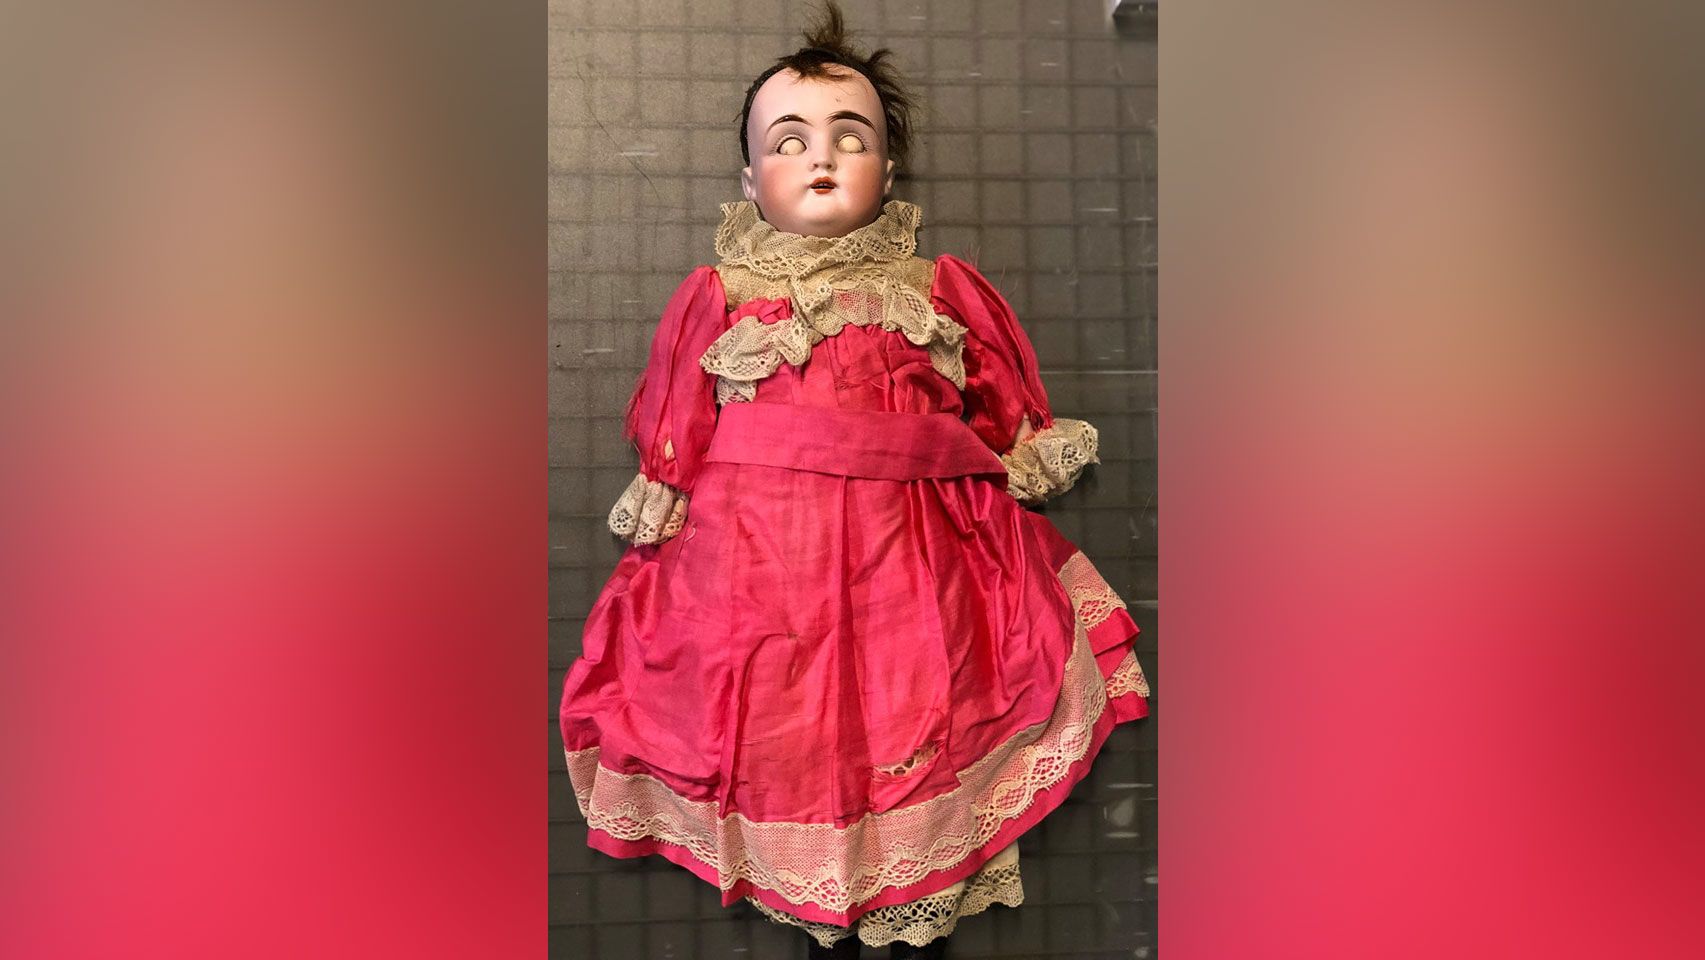 05 History Center of Olmsted County creepy dolls trnd